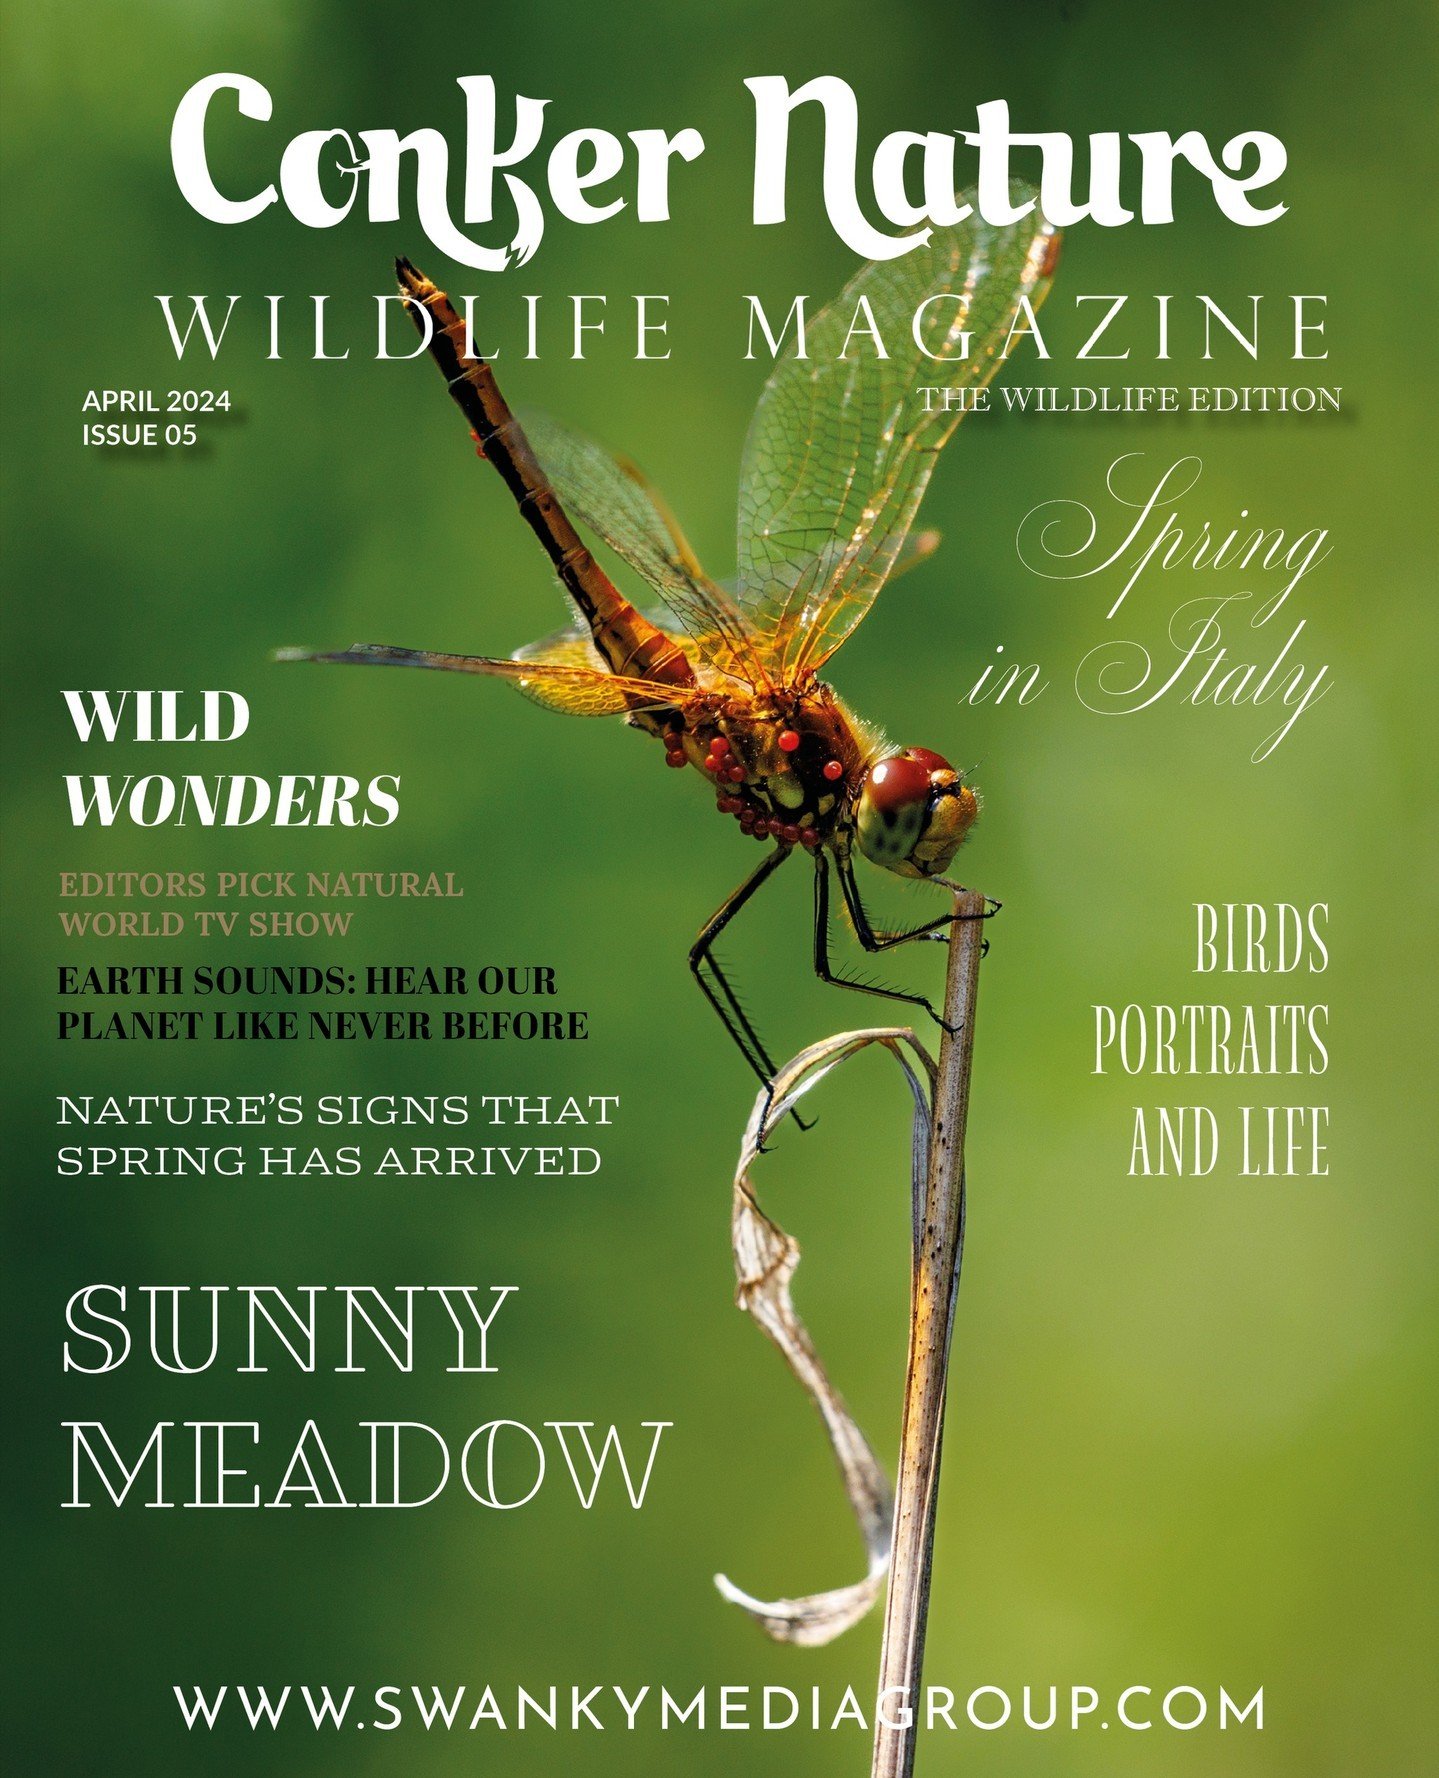 OUR APRIL 2024 WILDLIFE ISSUE HAS ARRIVED 💚⁠
⁠
Conker Nature Magazine - April 2024: The Wildlife Edition Issue 5⁠
⁠
This month our Editor-in-chief, Lucy Morris (@lucymorriswild), talks about this month&rsquo;s issue theme - the spring season. She de